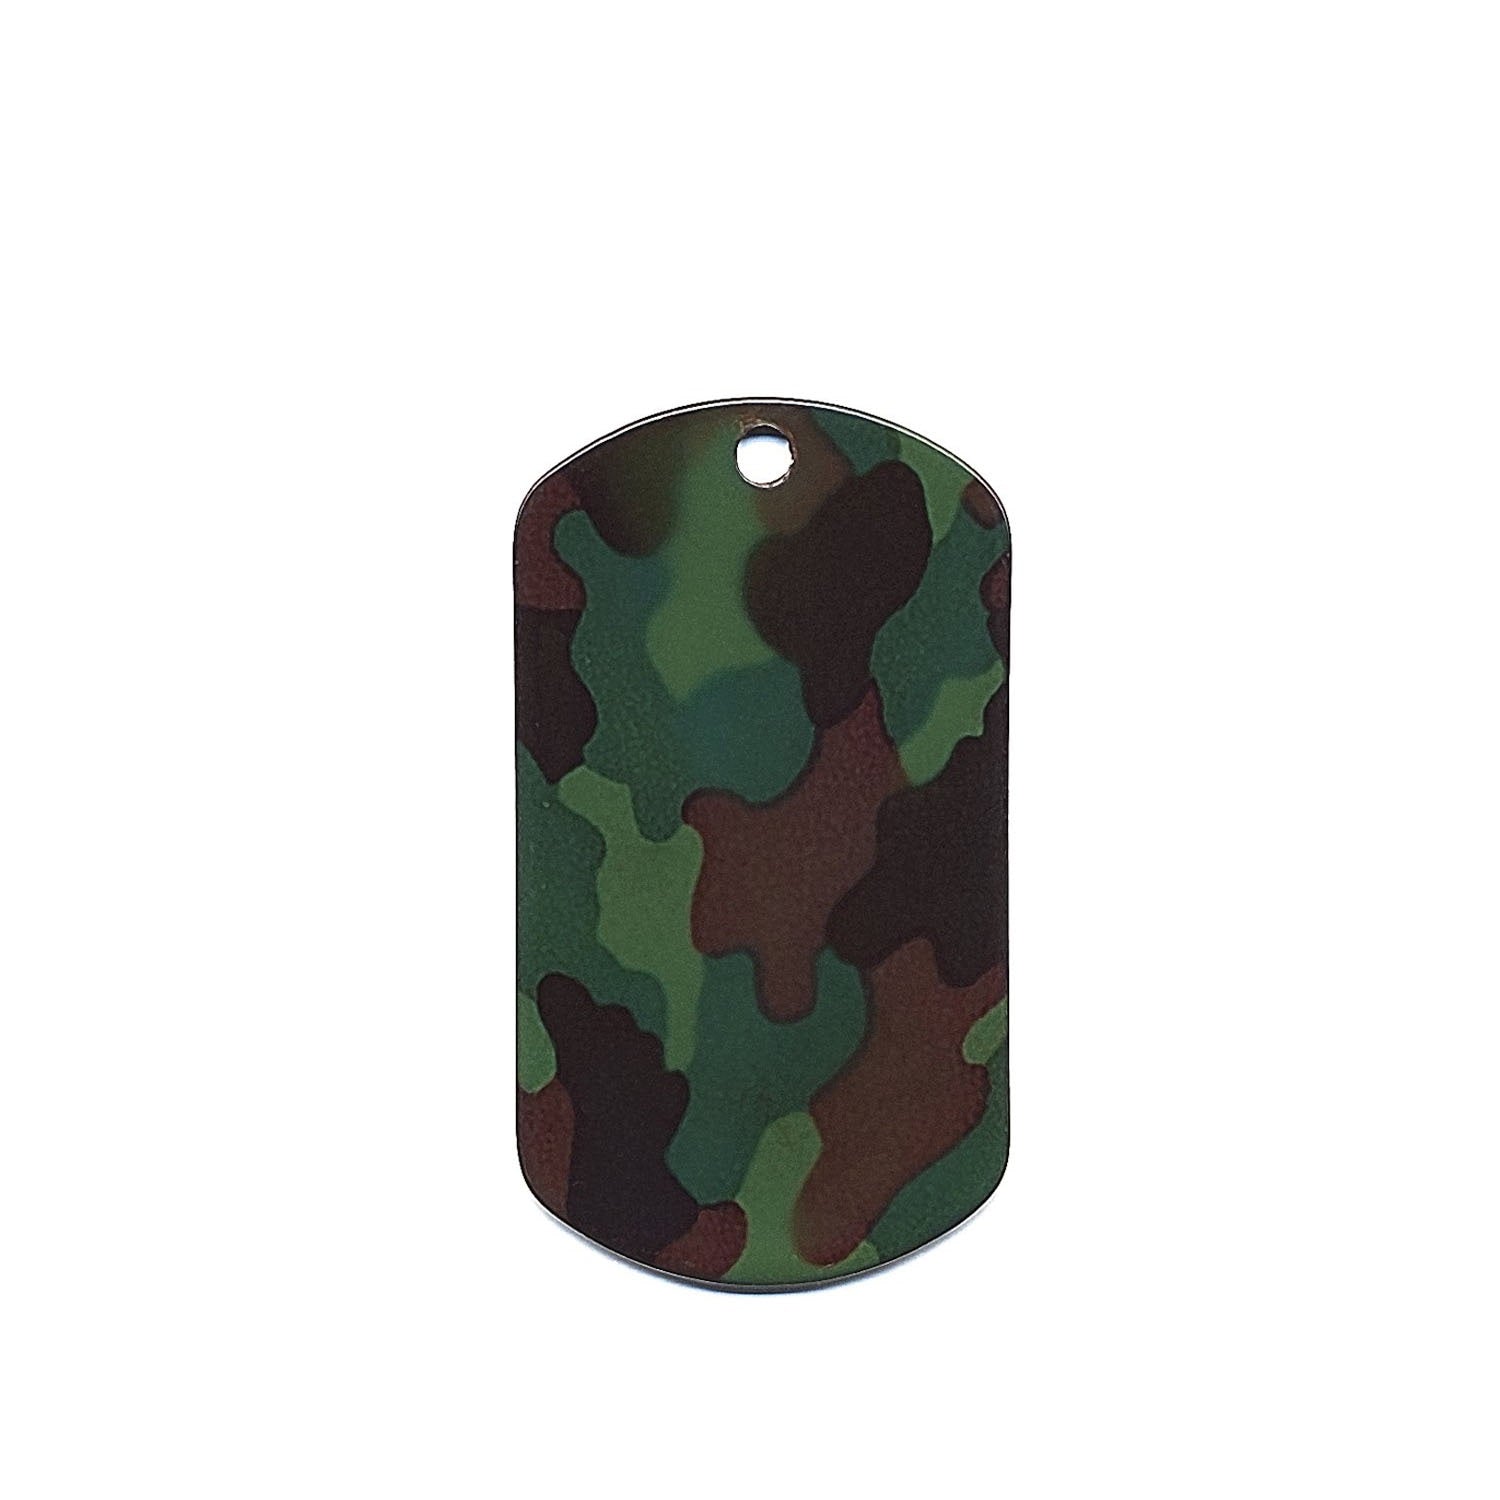 Rothco Camouflage Dog Tags are a stainless steel material with camo patterns.